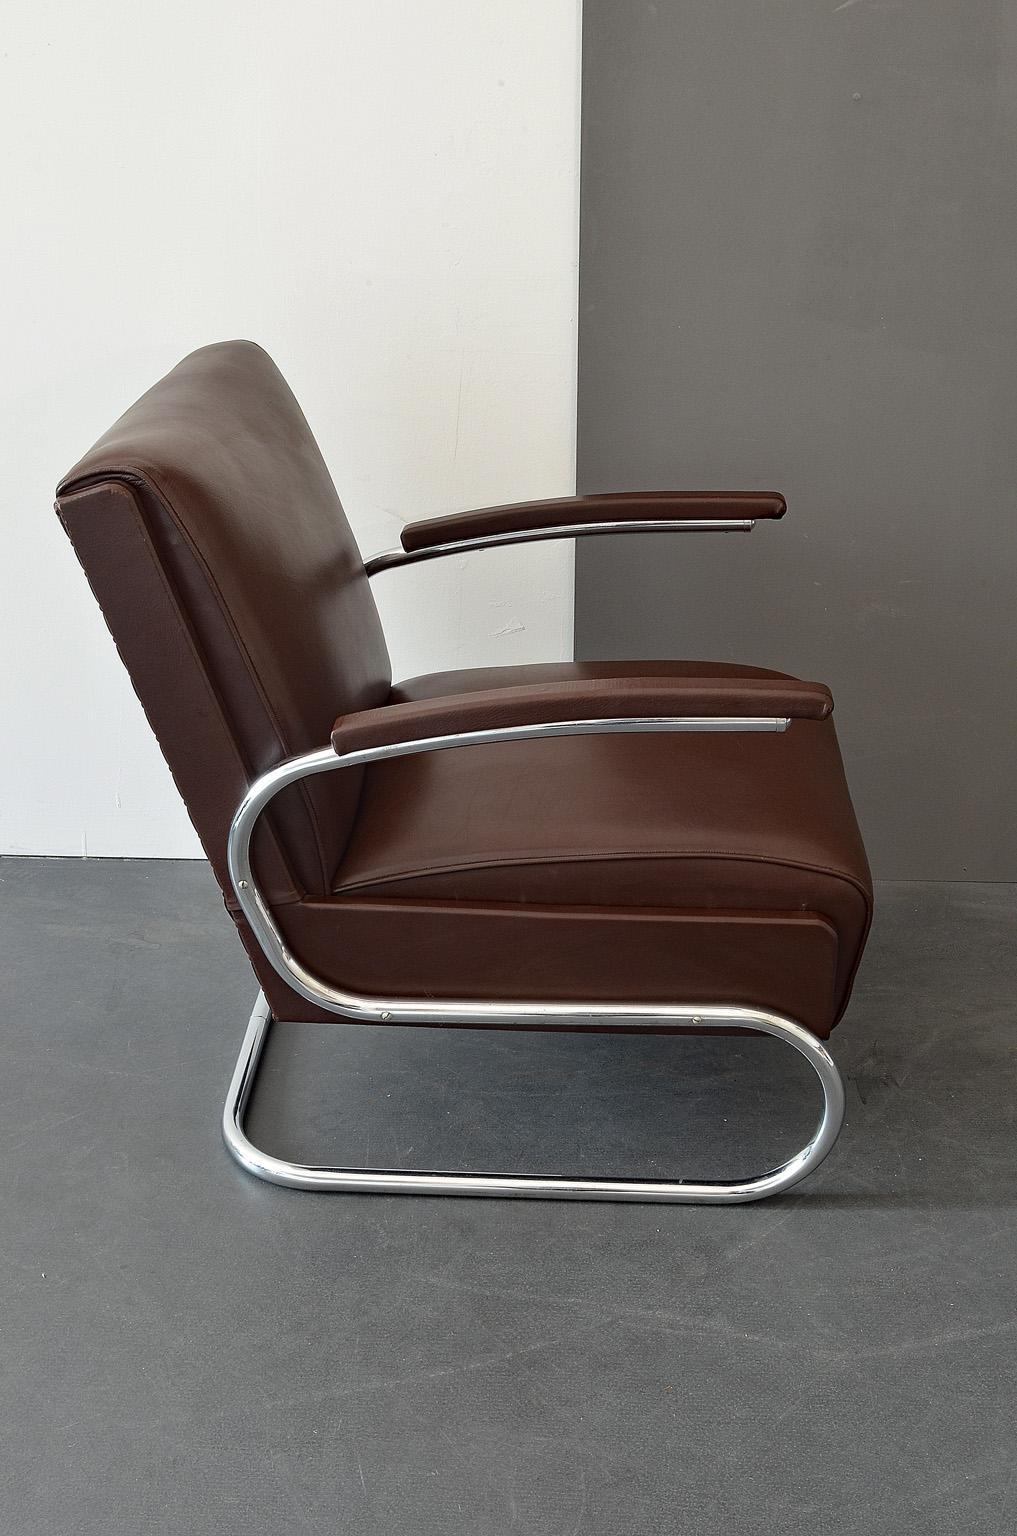 Art Deco Armchair / Cantilever Tubular Steel Brown Leather from Mücke Melder, 1930s For Sale